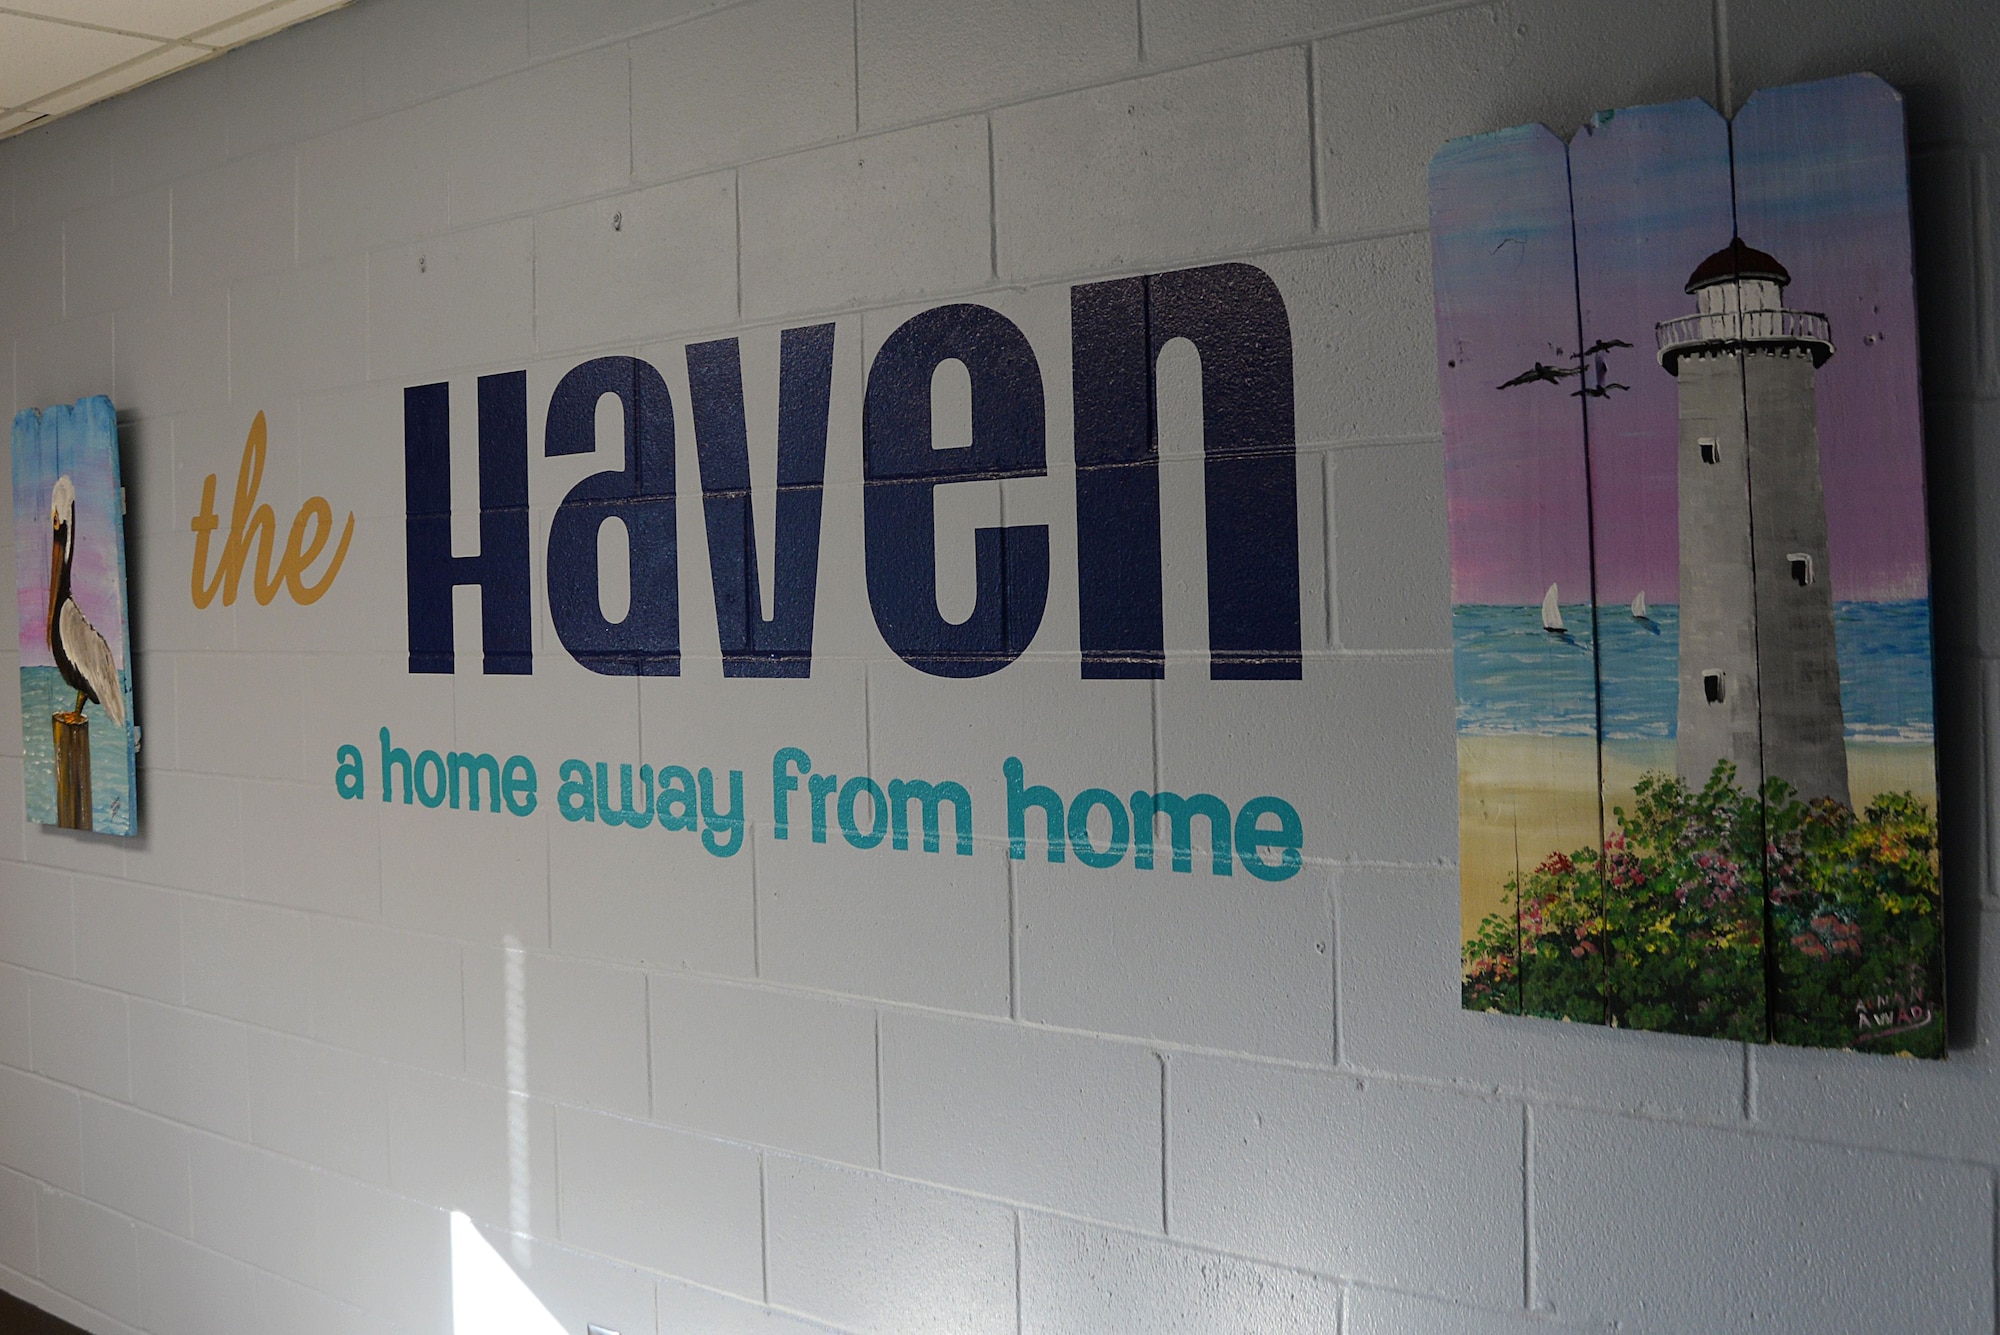 Paintings and a mural are displayed on the wall of the Haven during the Haven reopening Dec. 21, 2017, on Keesler Air Force Base, Mississippi. The Keesler Five-Six Council helped repaint the Haven and bought decorations to improve the dorm common area for Keesler’s dorm residents. (U.S. Air Force photo by Airman 1st Class Suzanna Plotnikov)